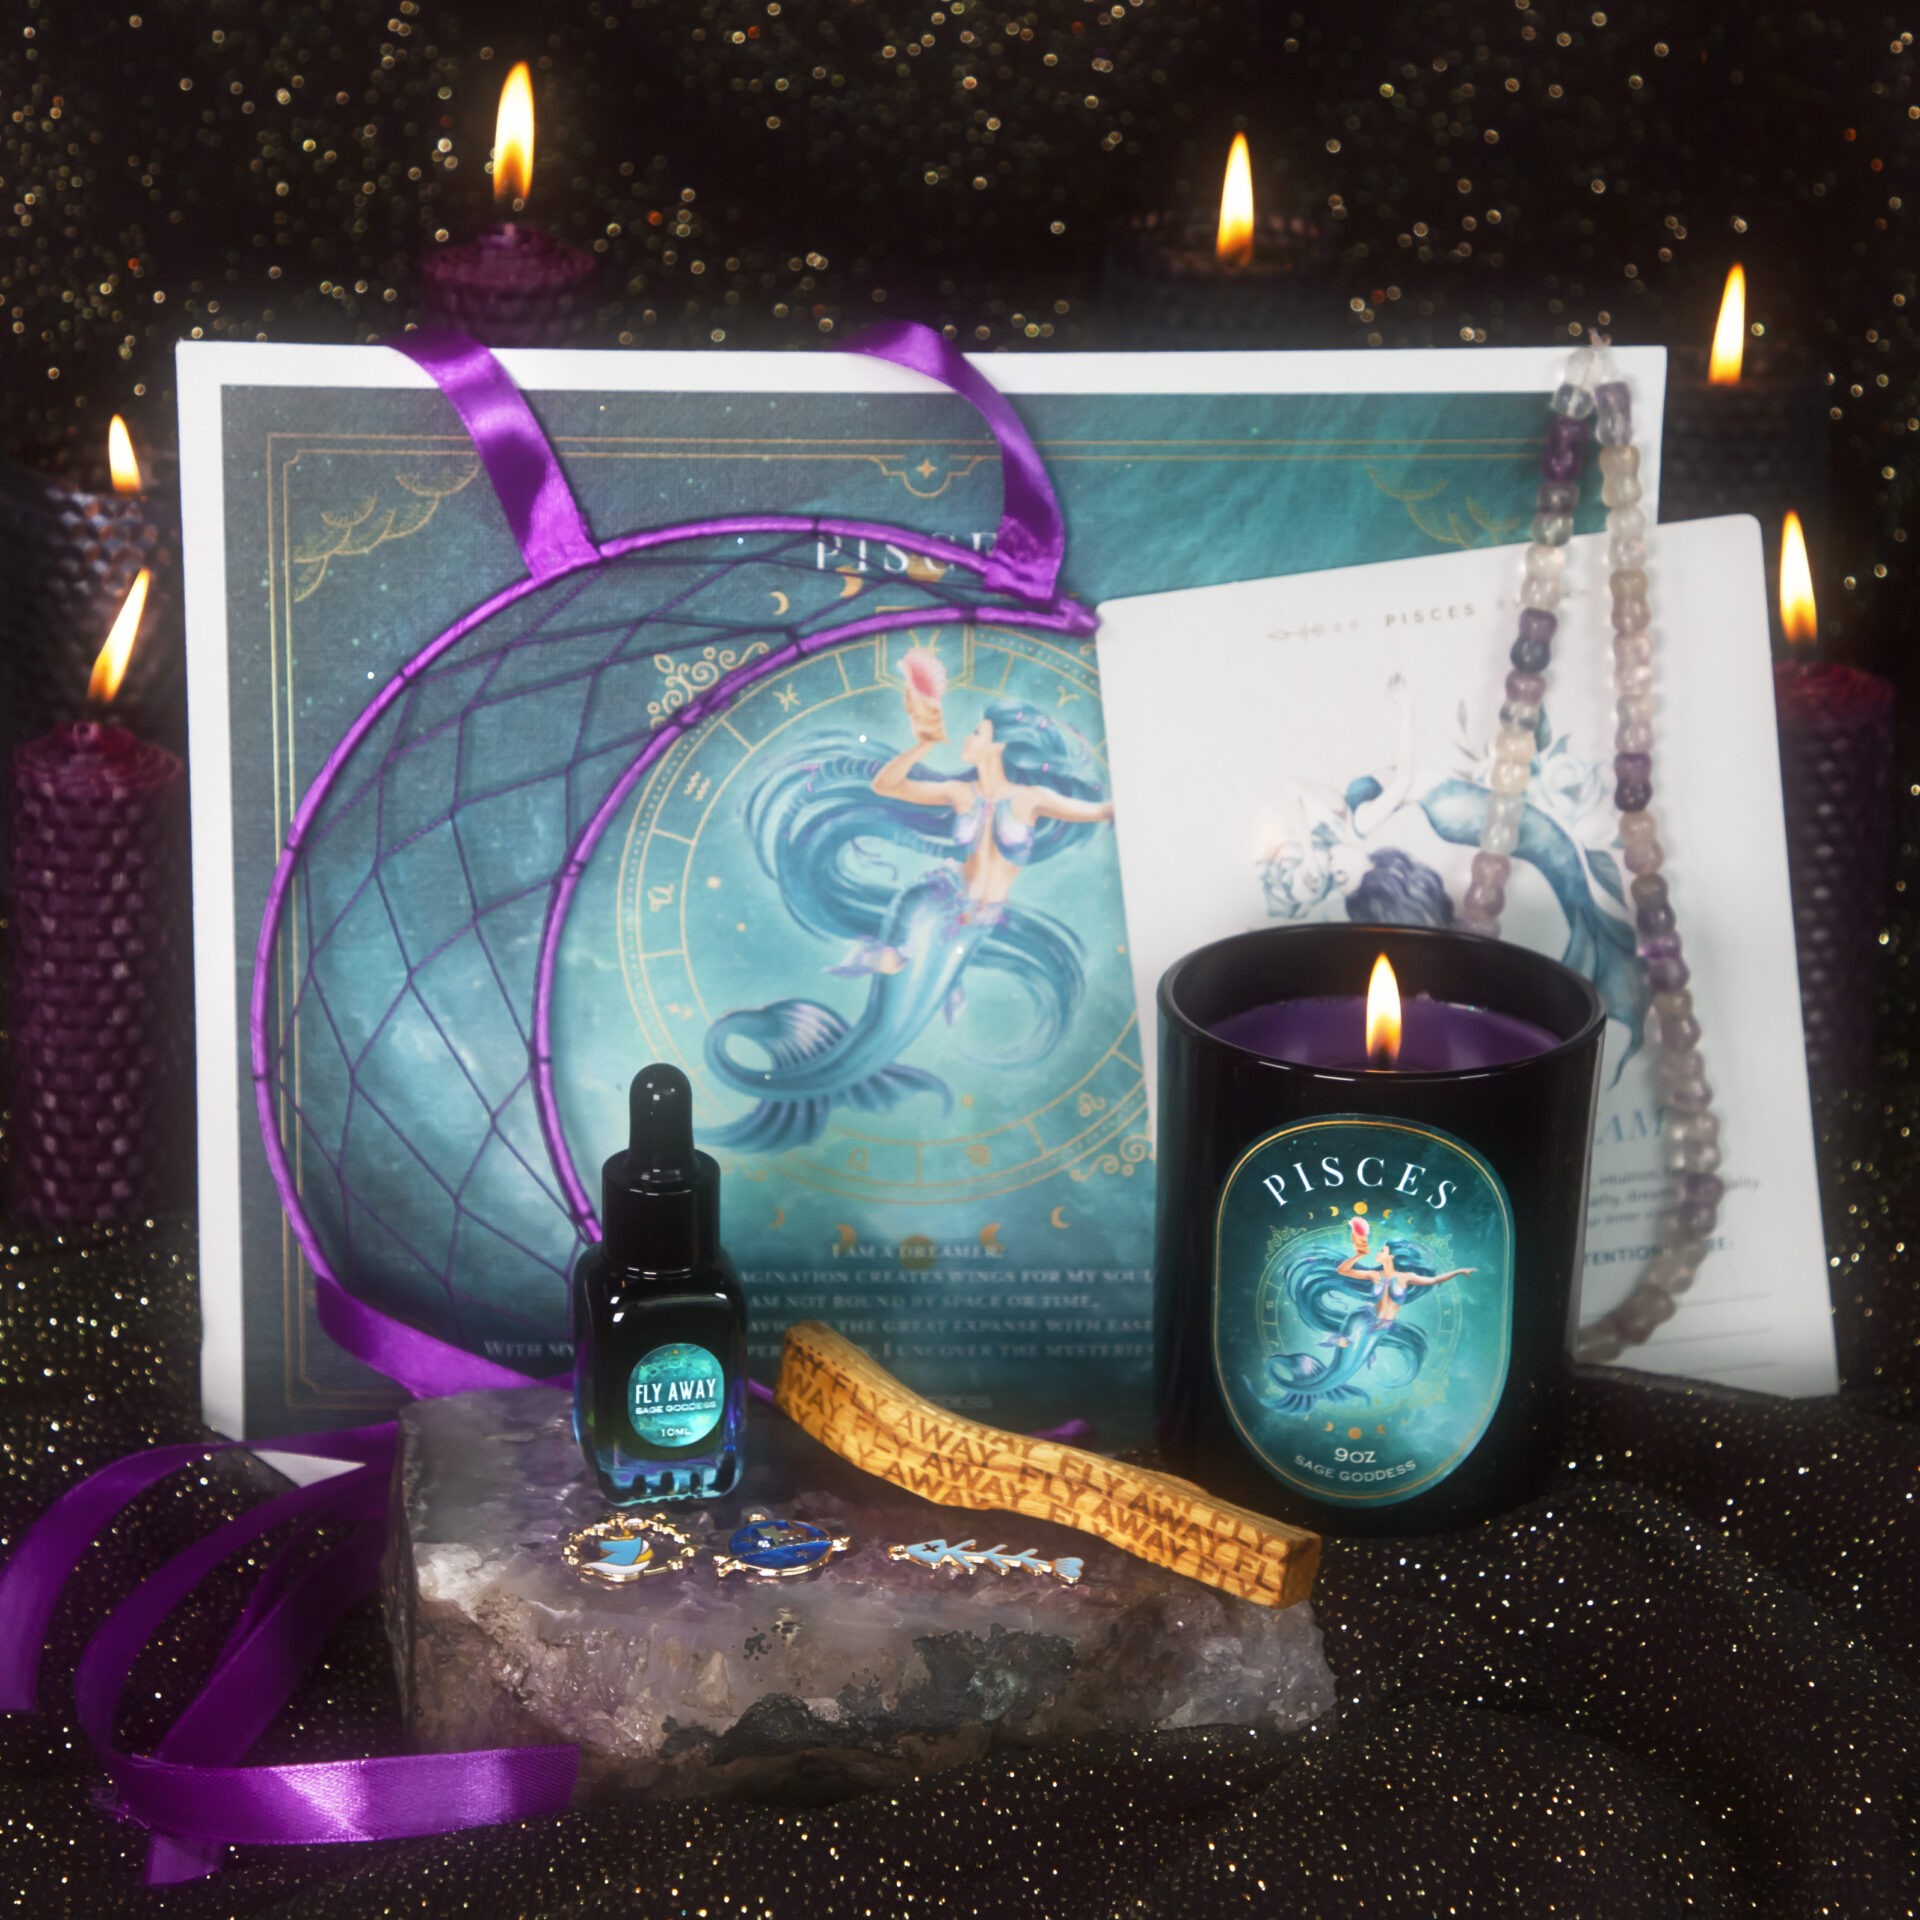 DREAM DROPS PERFUME, Relaxation Gifts for Women, Jupiter Pisces Sleep –  Stardust & Stems